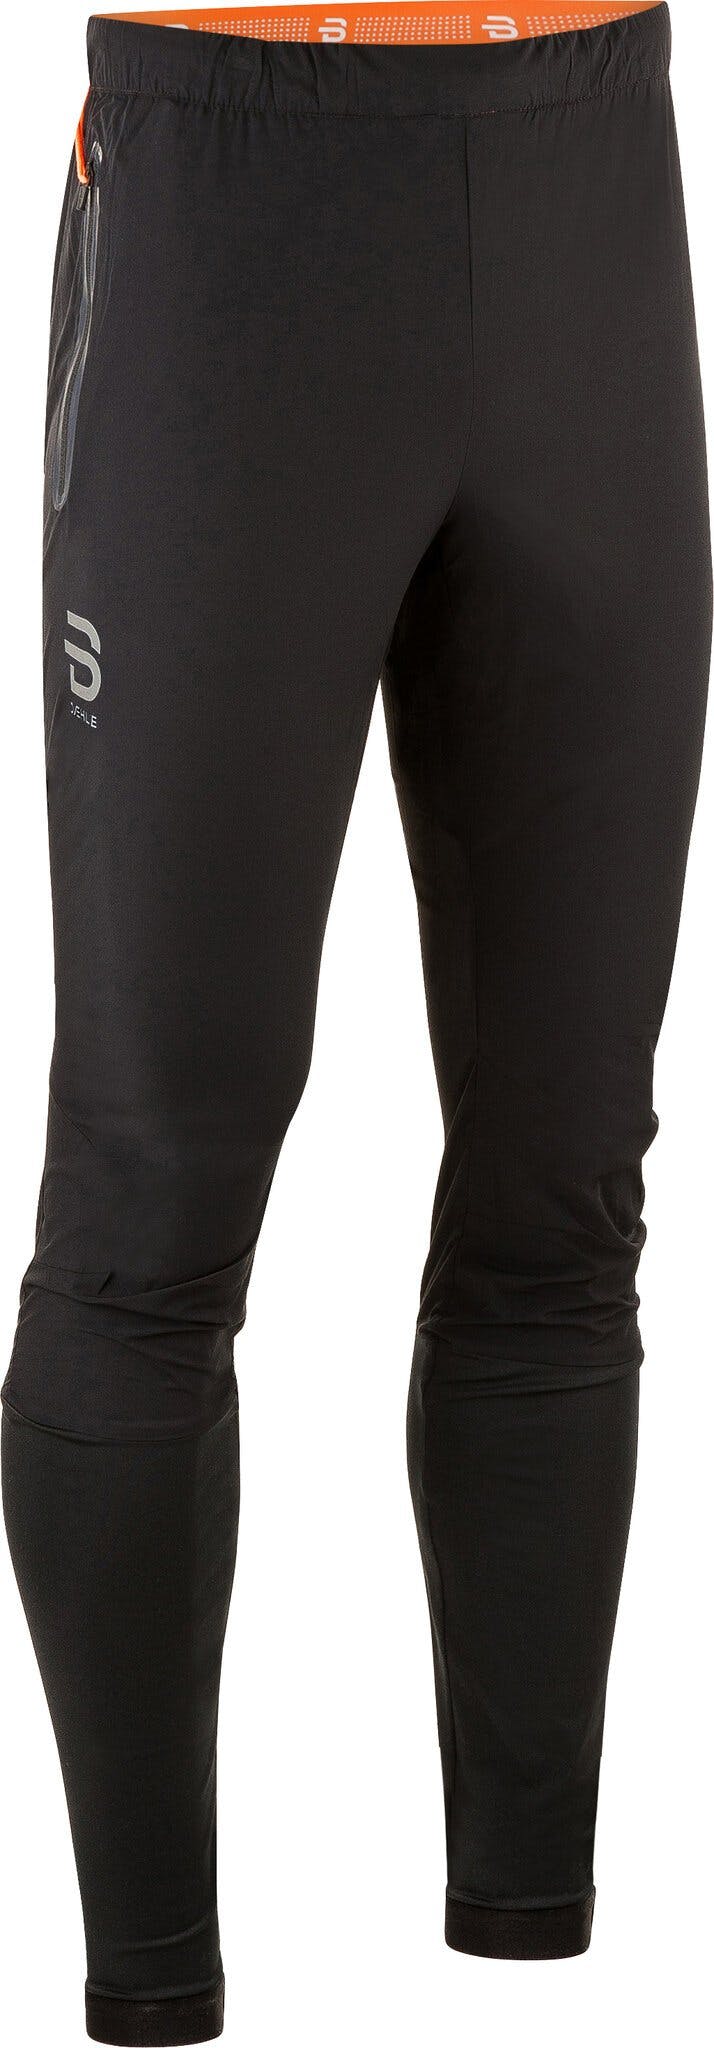 Product image for Running Pant - Men's